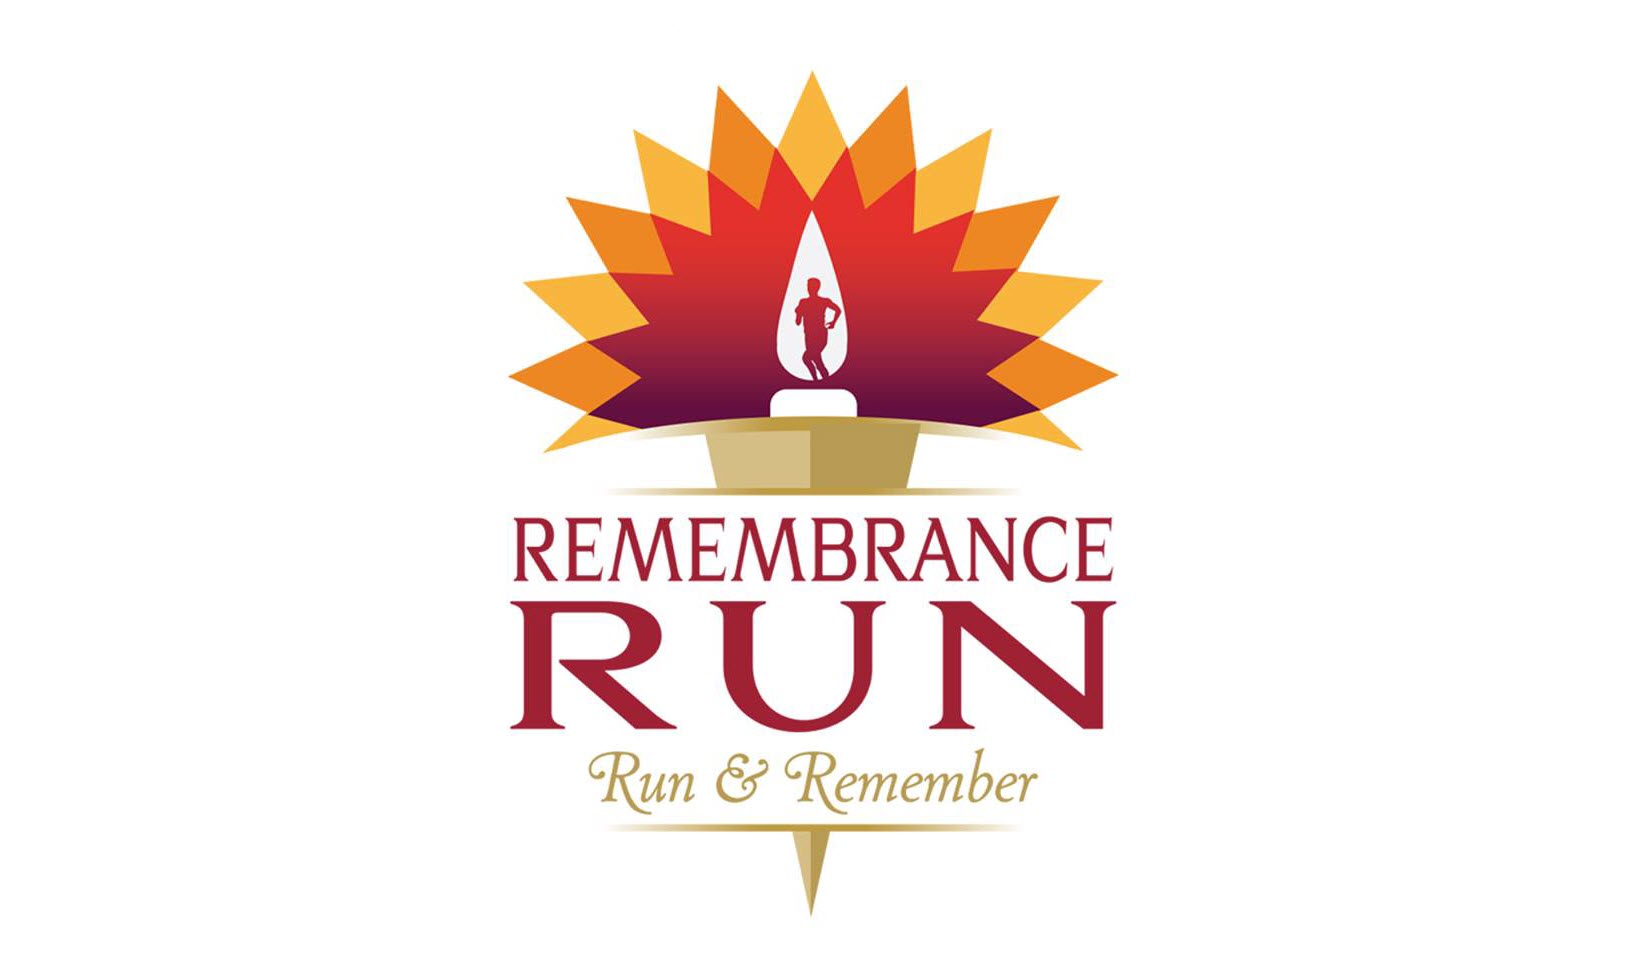 The 2020 Remembrance Run Goes Virtual